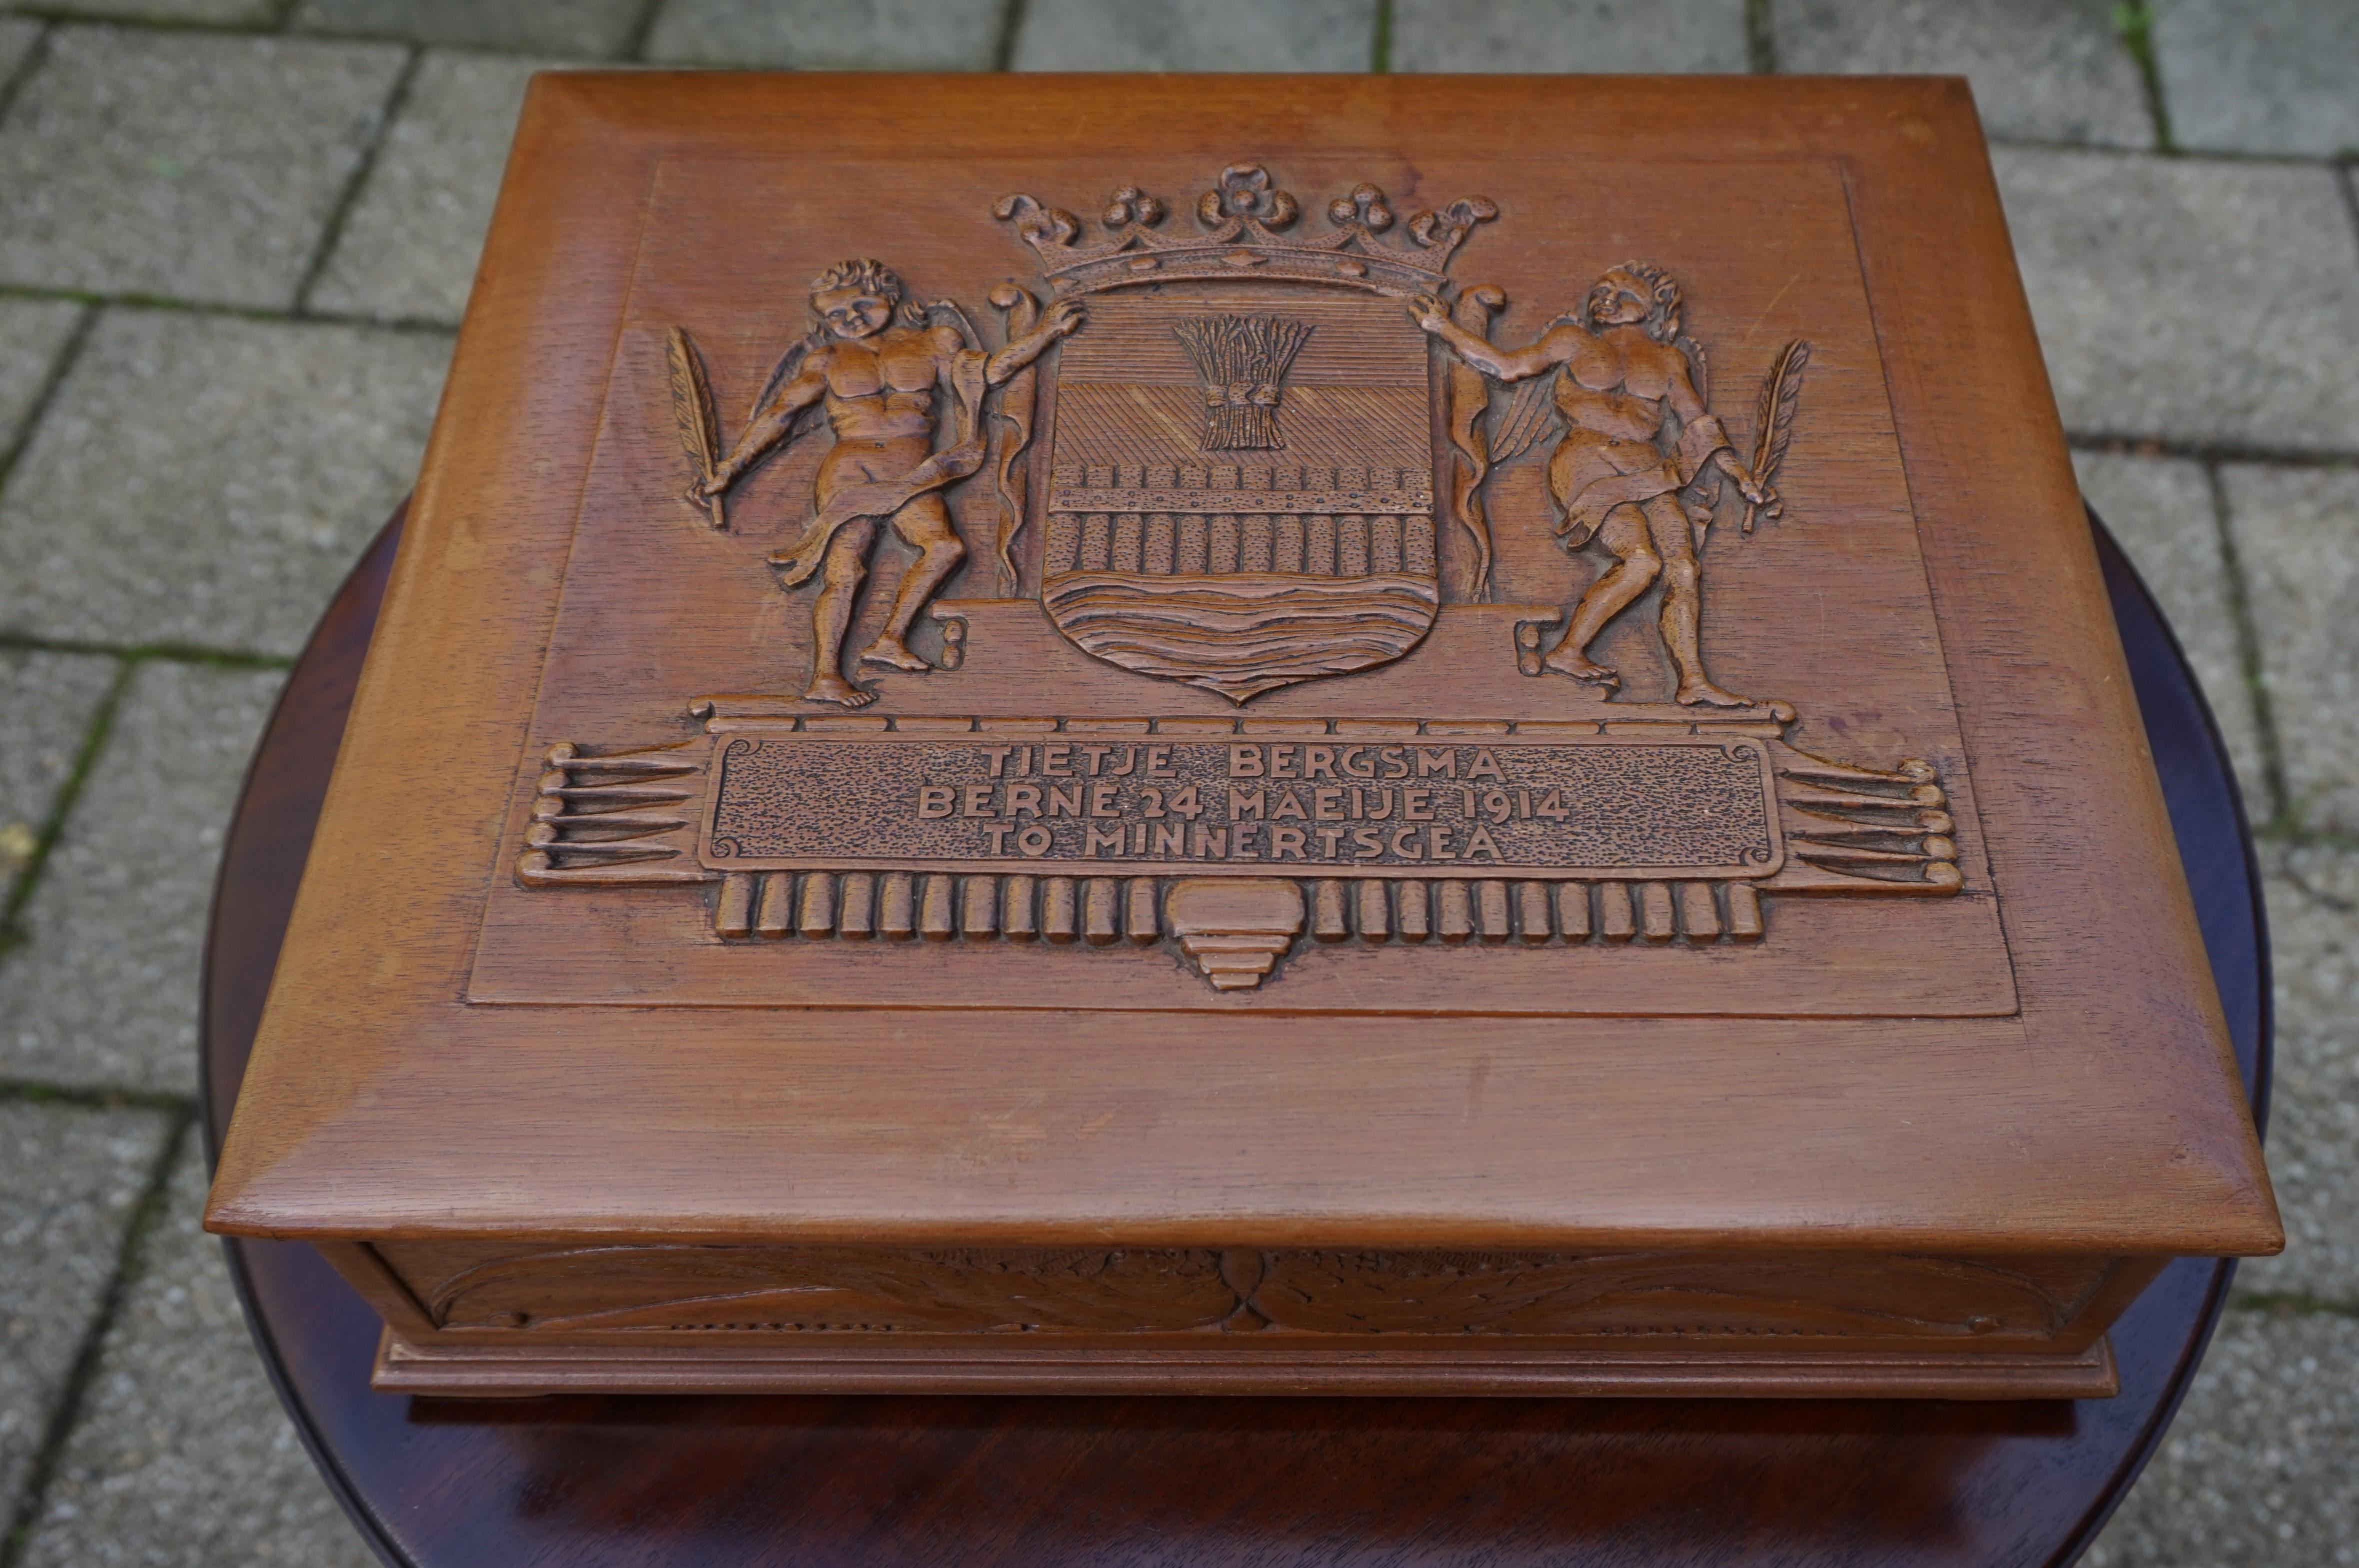 One of a kind antique box by master carver and sculptor S.A. Bergsma from Friesland, Netherlands.

Earlier this year we purchased a number of items from a local museum in the Northern Province of Friesland and this unique box is another one of the